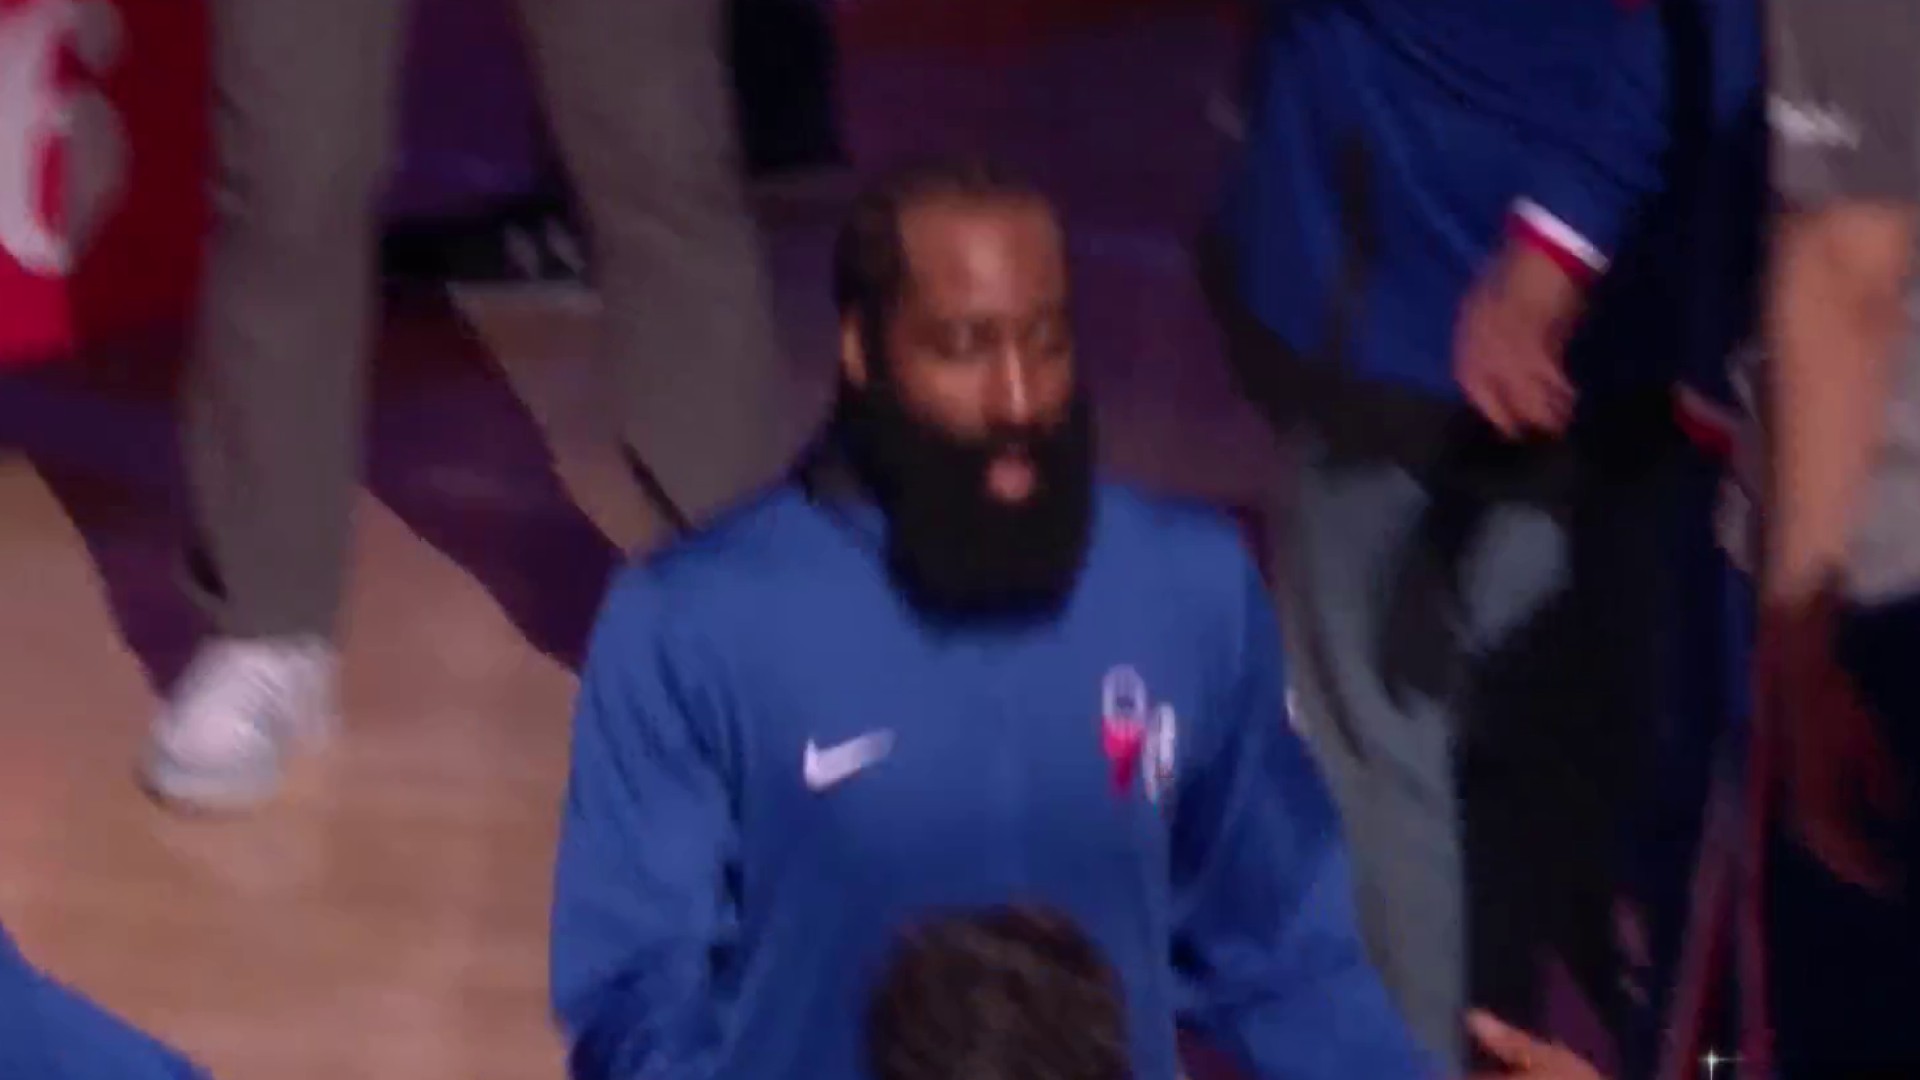 James Harden puts on a show in home debut - Liberty Ballers